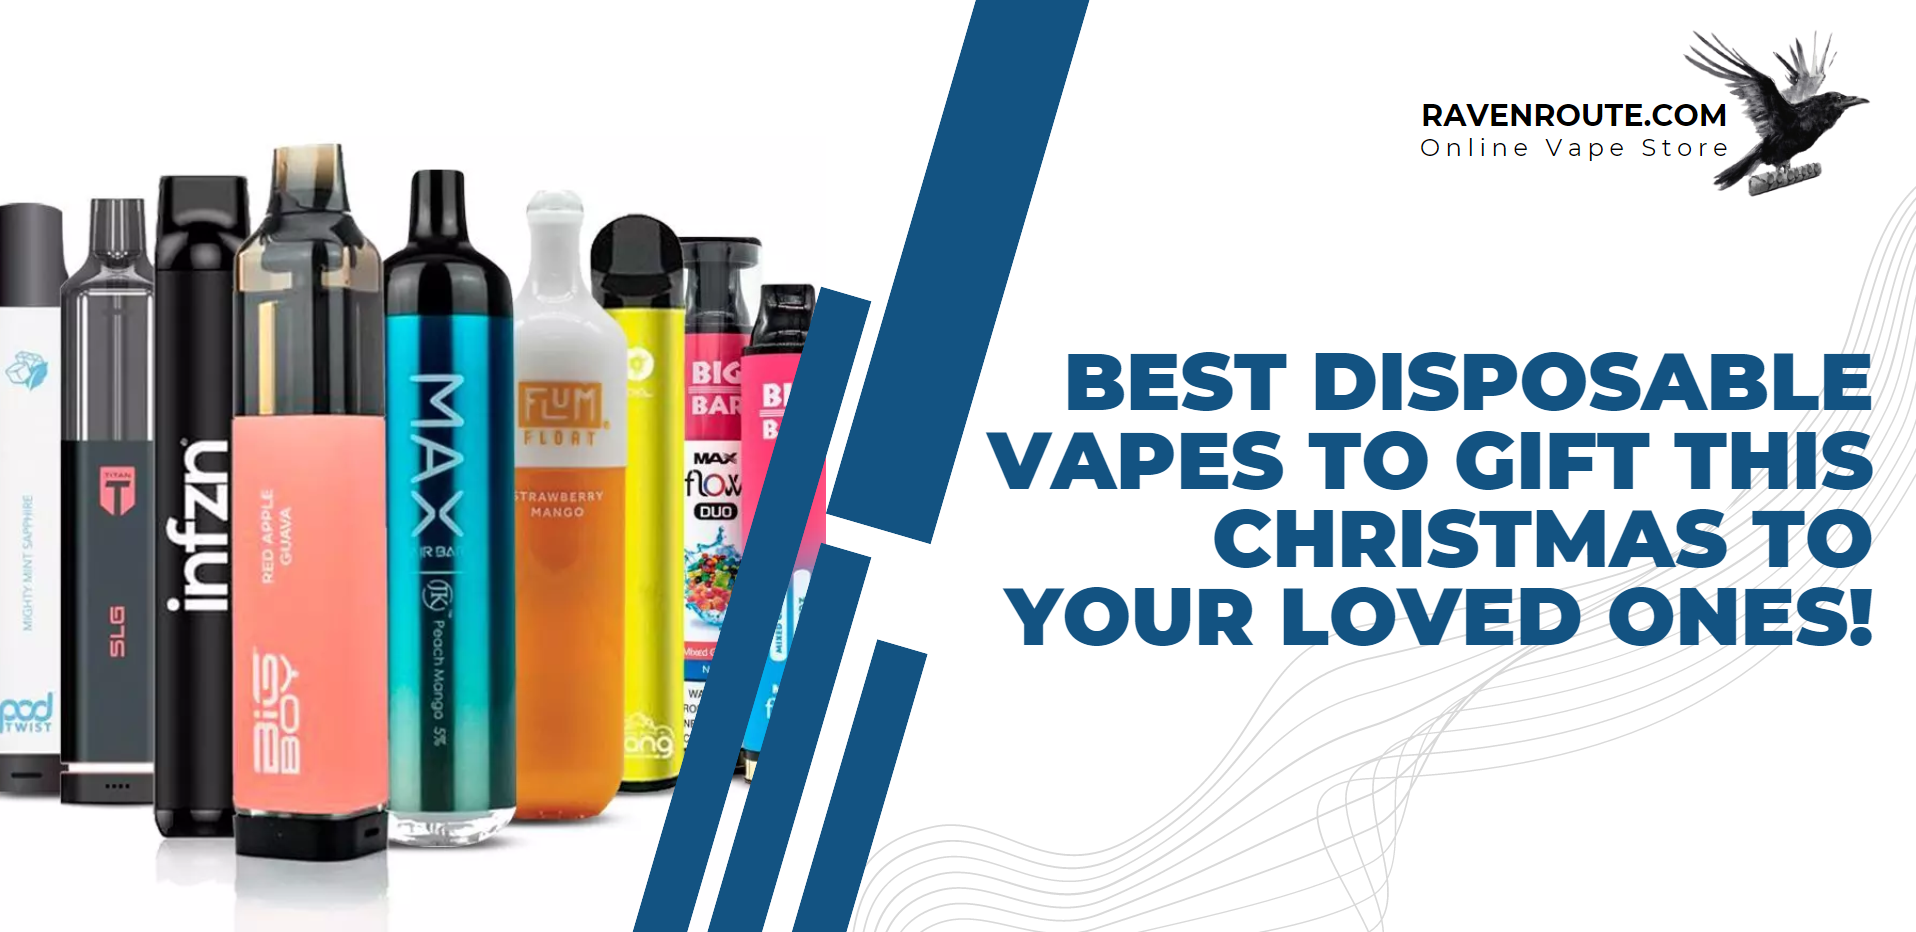 Best Disposable Vapes To Gift This Christmas To Your Loved Ones!